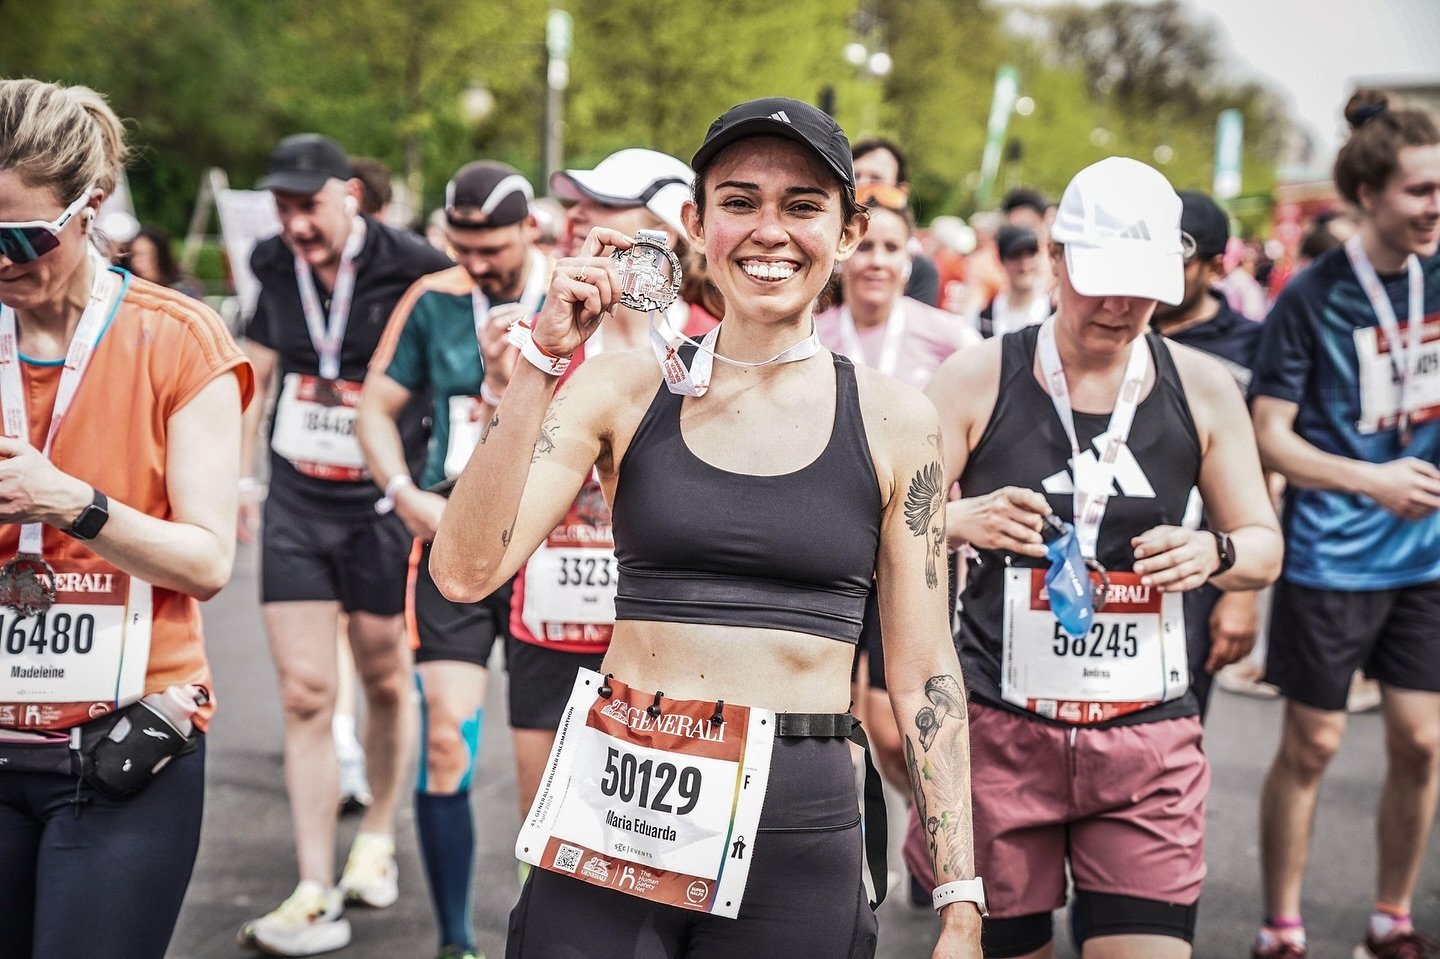 Eduarda @dudaschar completing the Berlin 1/2 marathon recently 💪🏼

We can&rsquo;t wait to work towards the @bearraces Clontarf 1/2 marathon in July. This year will be bigger than ever for the race on our front door @elementhfp twice a year. 

Inter